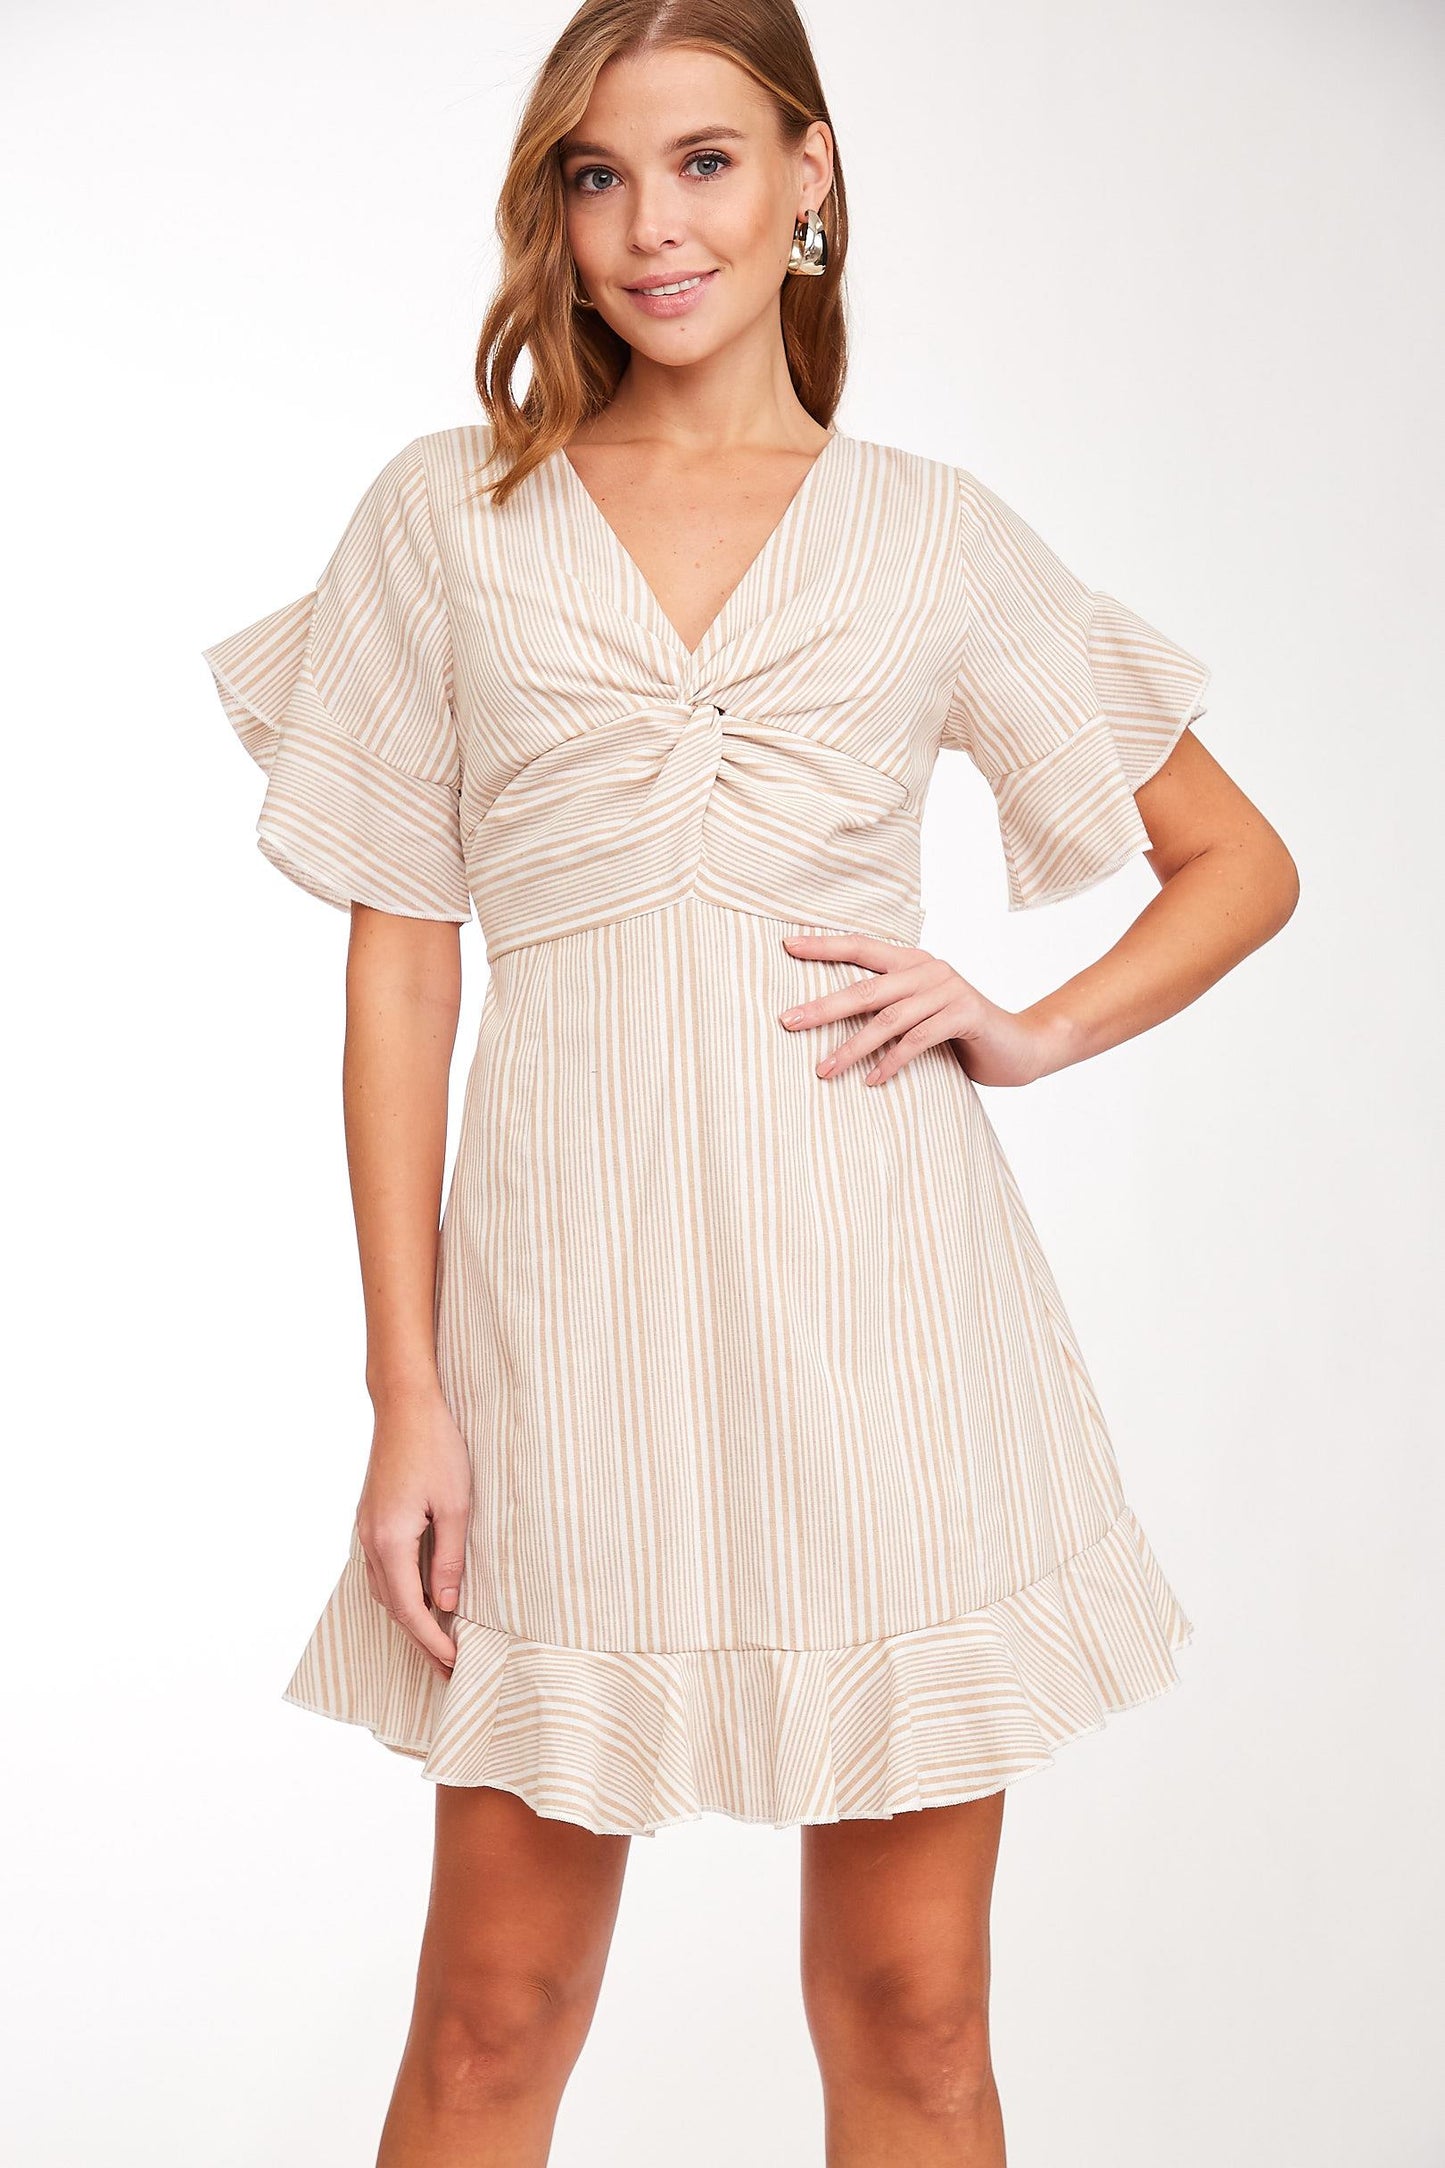 LLOVE sand striped dress with back bow LV7012